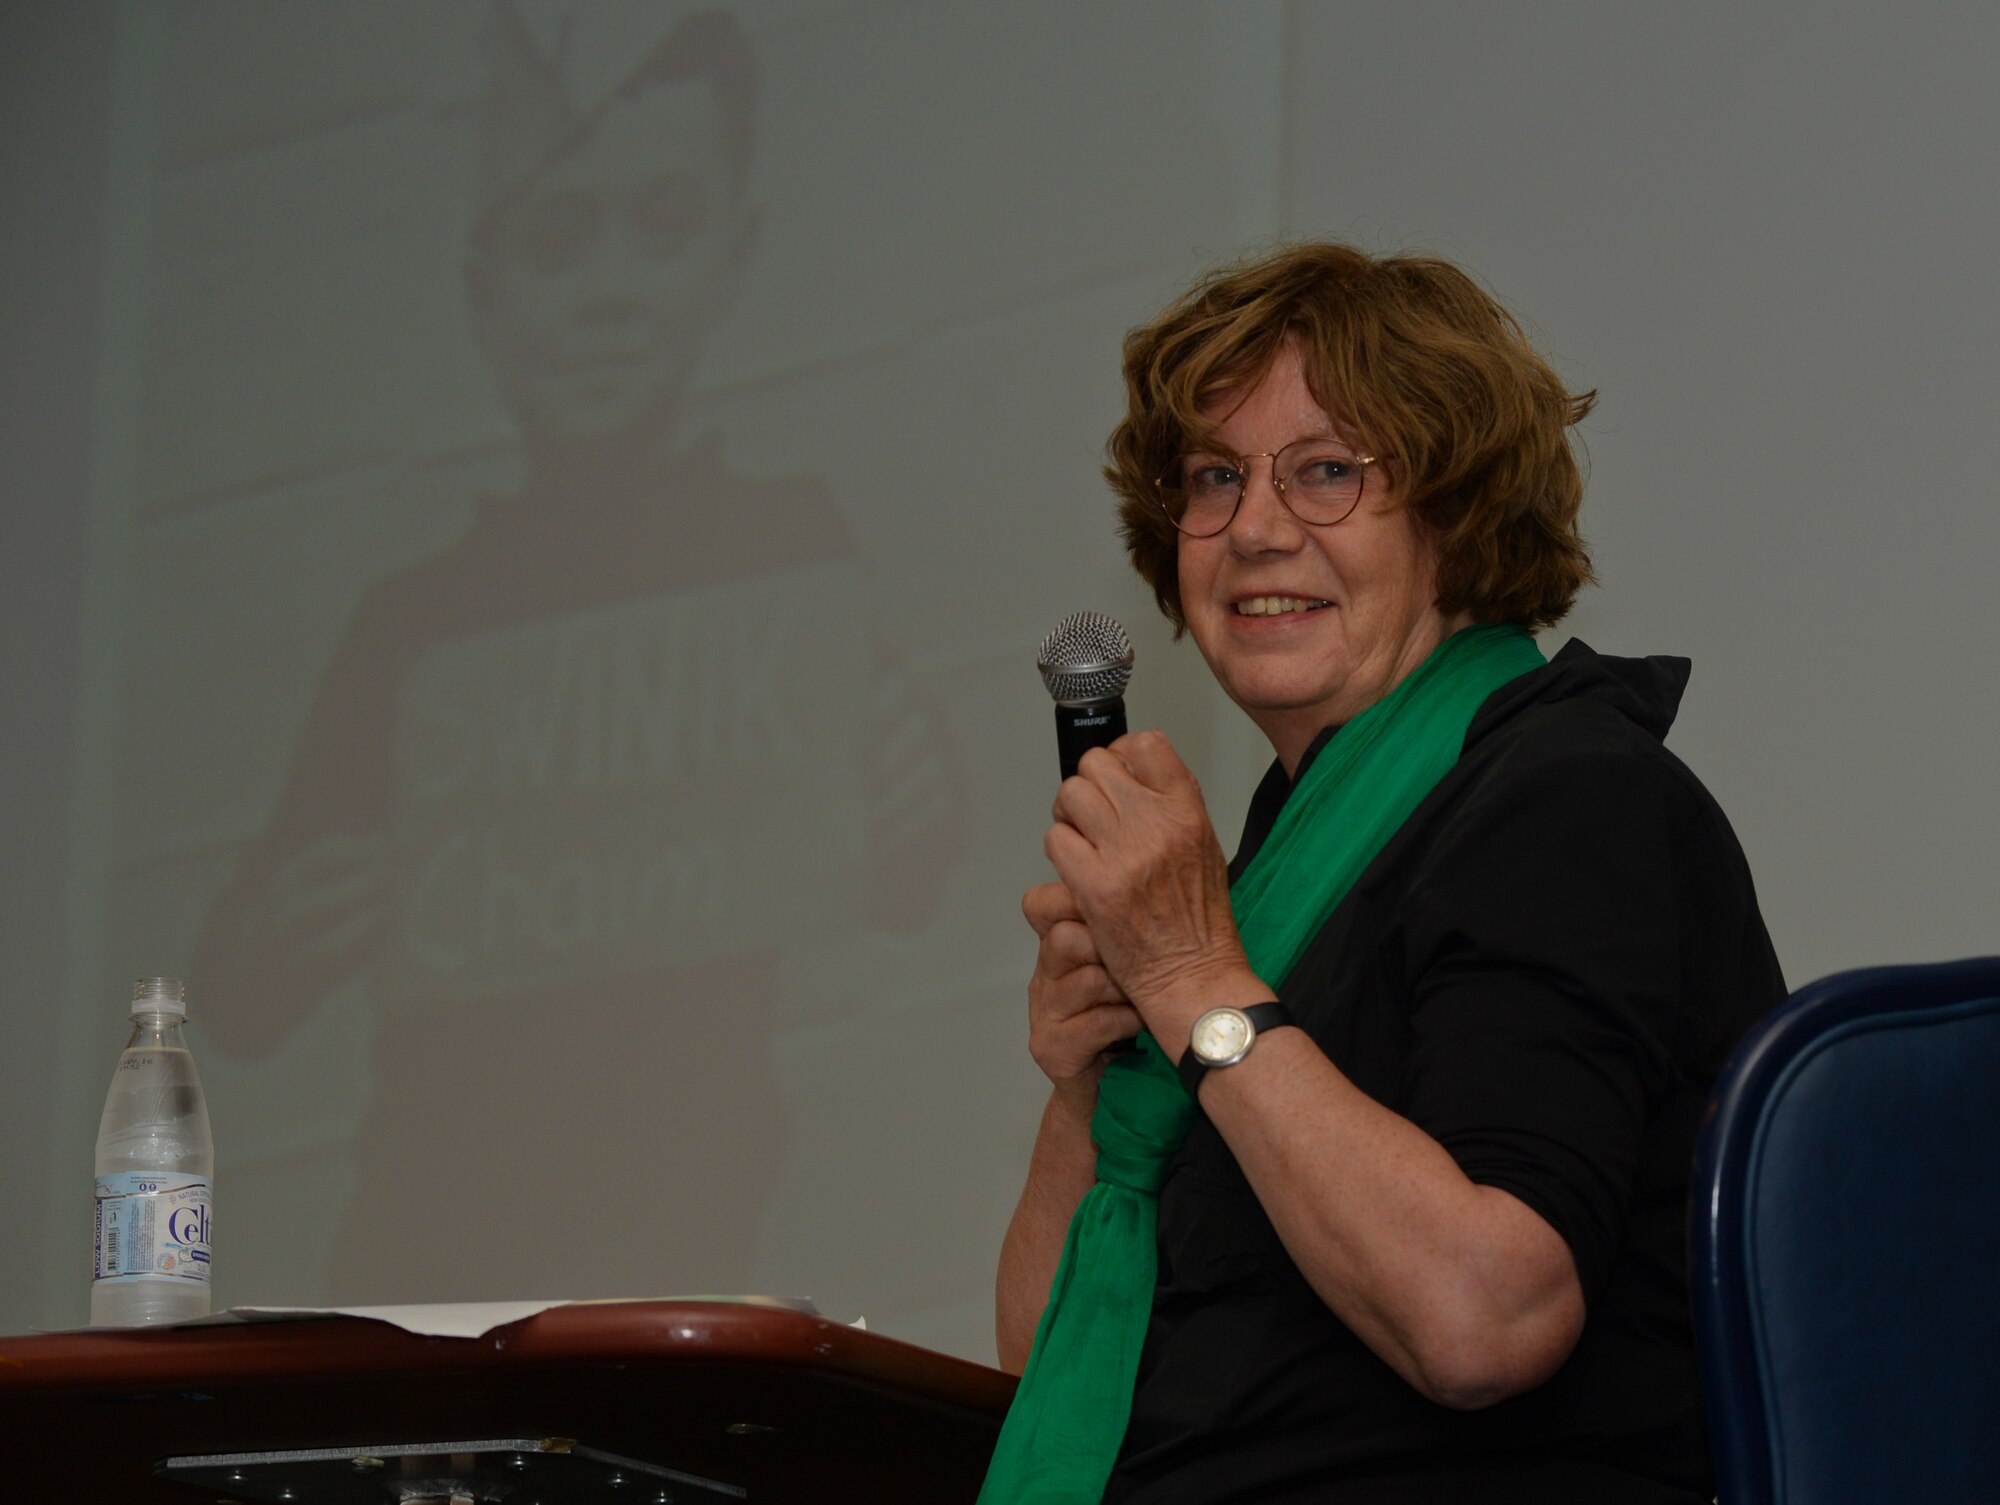 Anna Andlauer, an educator from Markt Indersdorf, Germany, speaks about child survivors of the Holocaust during her presentation as a part of the Diversity Day celebration at Club Eifel at Spangdahlem Air Base, Germany, Aug. 25, 2014. Andlauer commented on how child survivors, such as the one pictured, would wear Allied military flight caps to dress like their liberators.  (U.S. Air Force photo by Staff Sgt. Joe W. McFadden/Released)